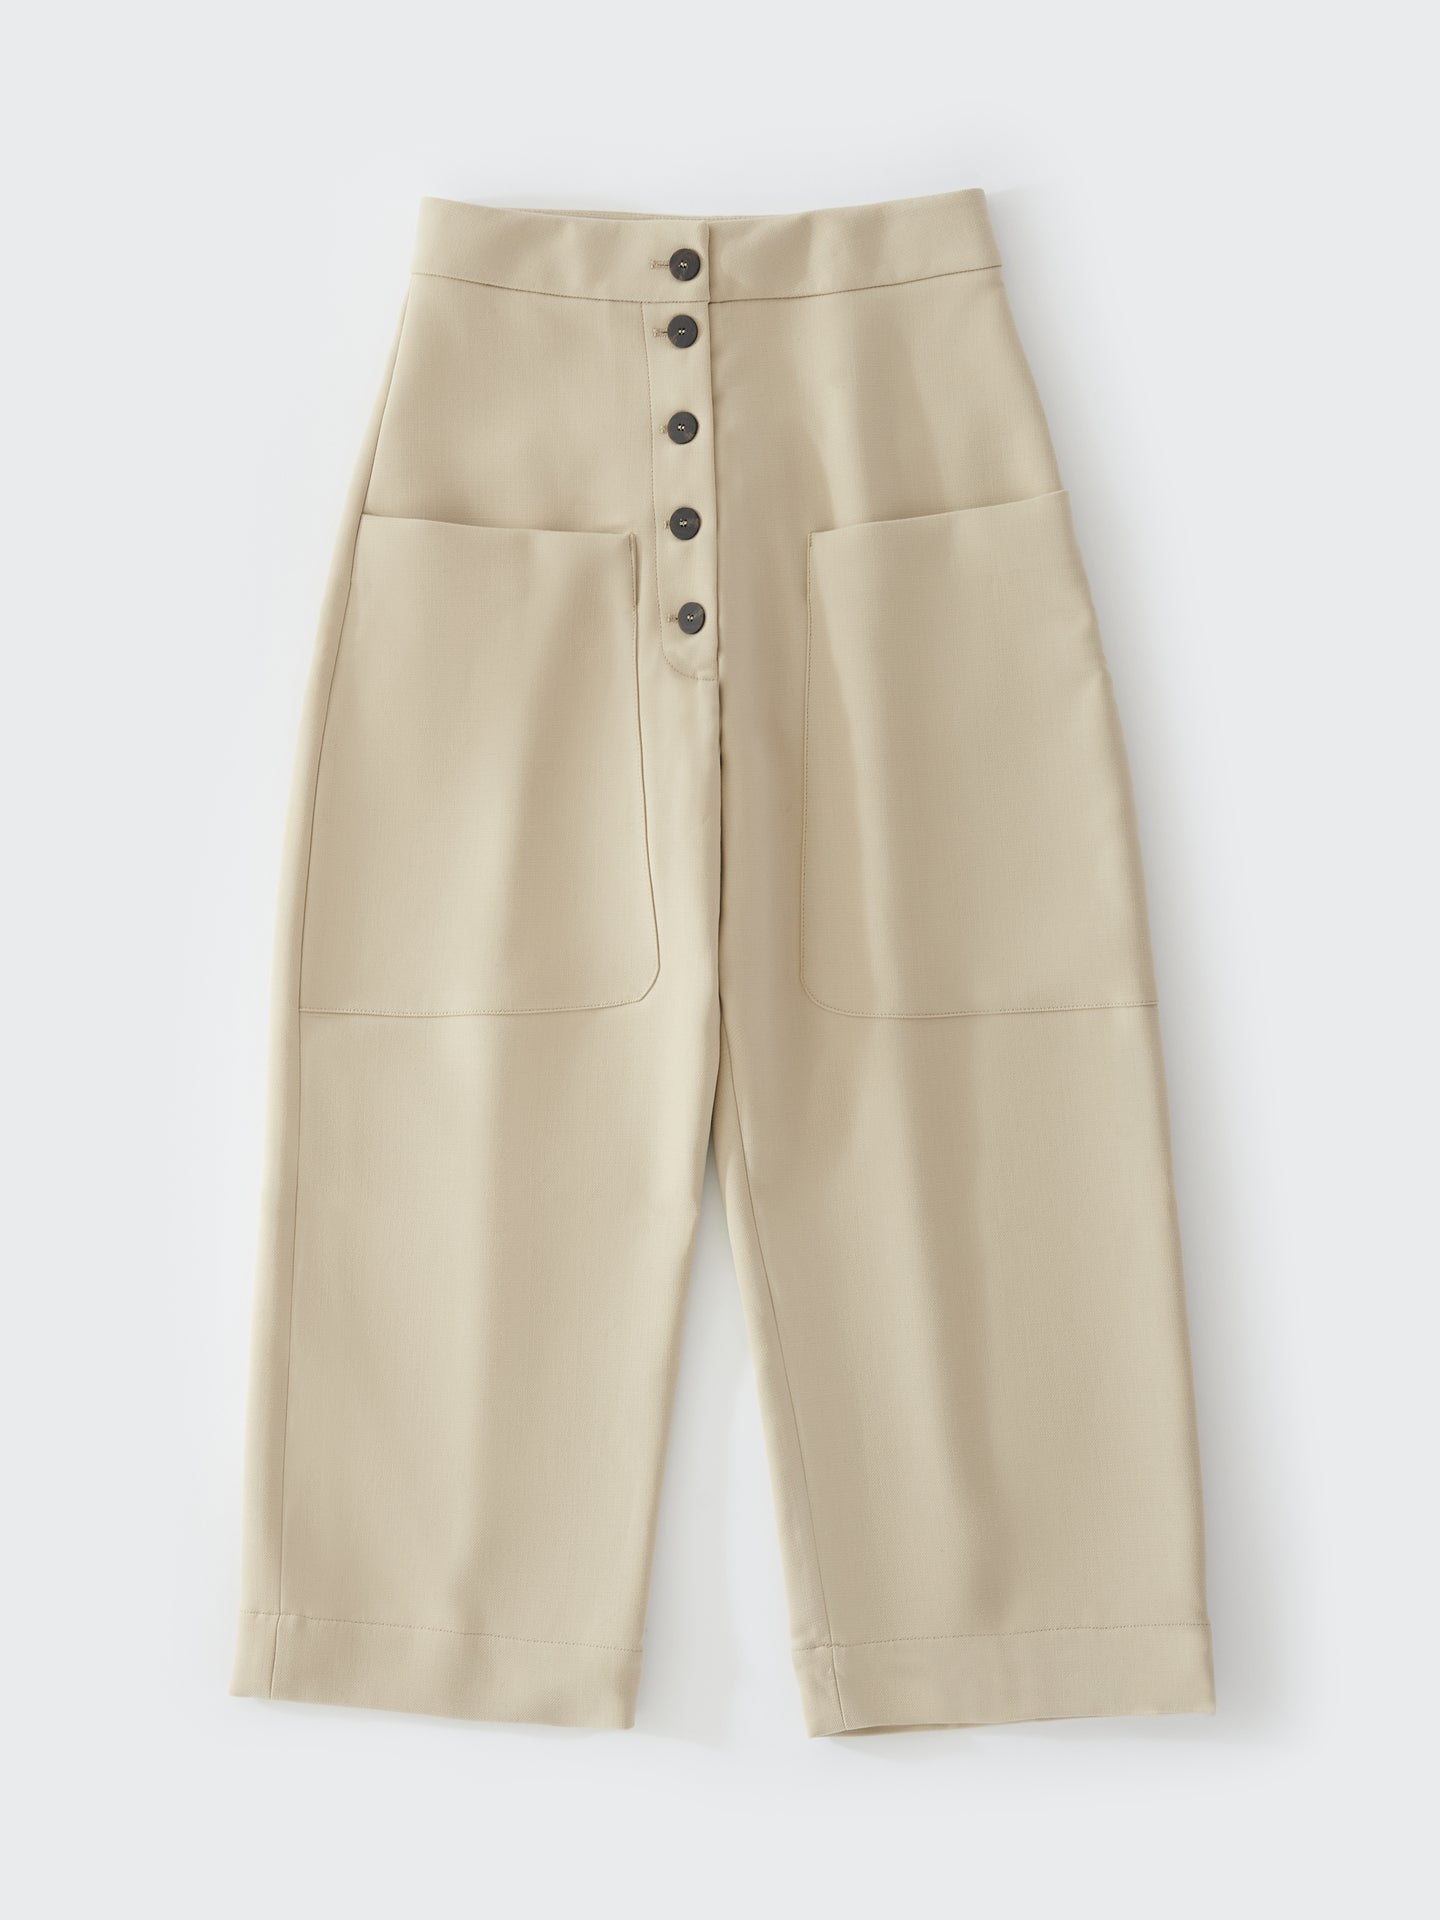 TAUPO PANT IN LIGHT BAMBOO